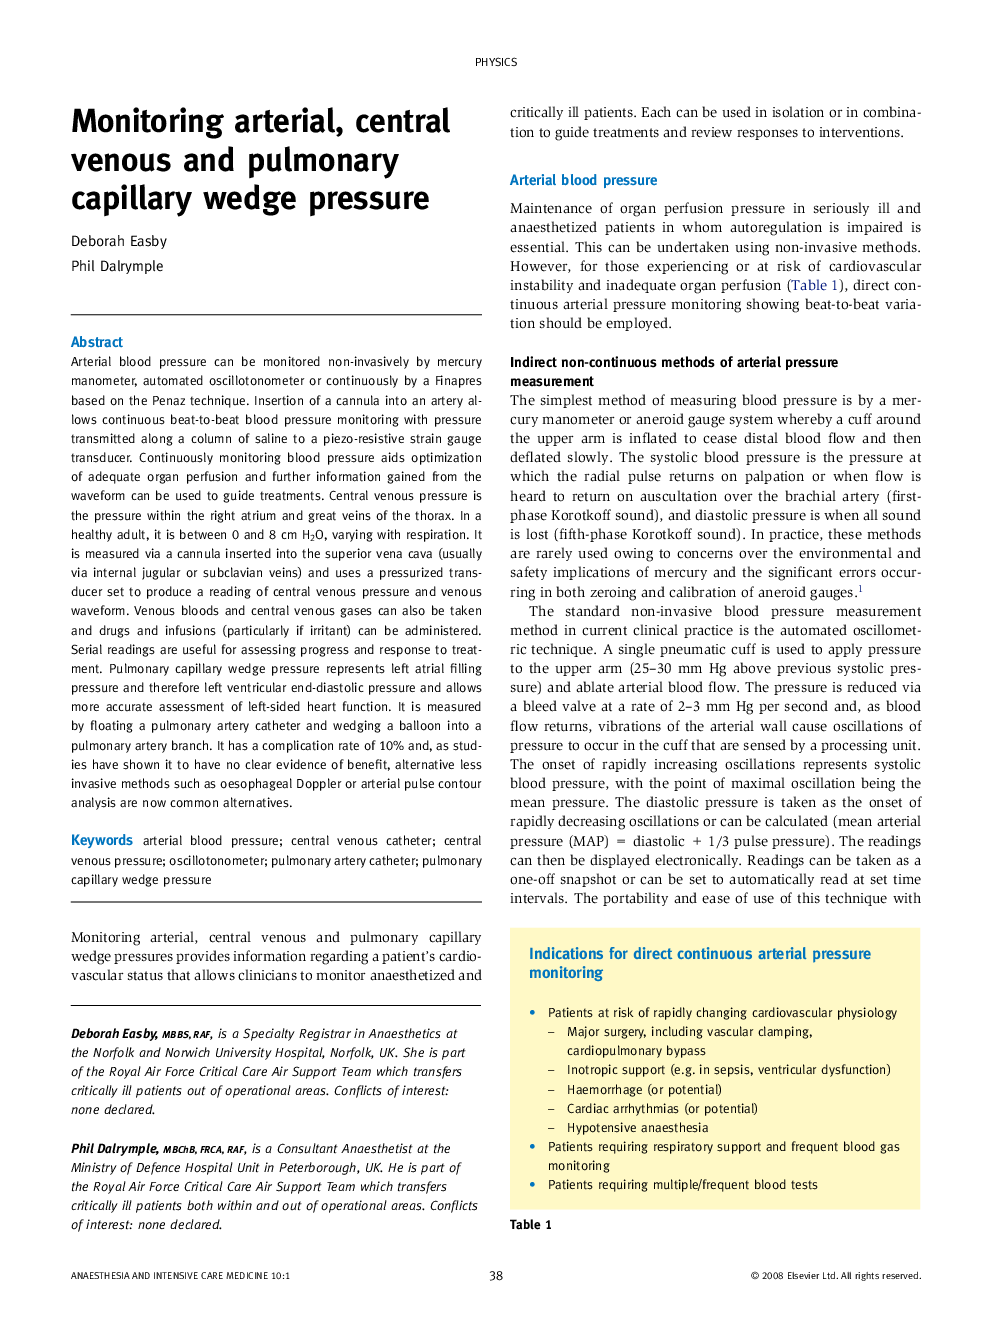 Monitoring arterial, central venous and pulmonary capillary wedge pressure